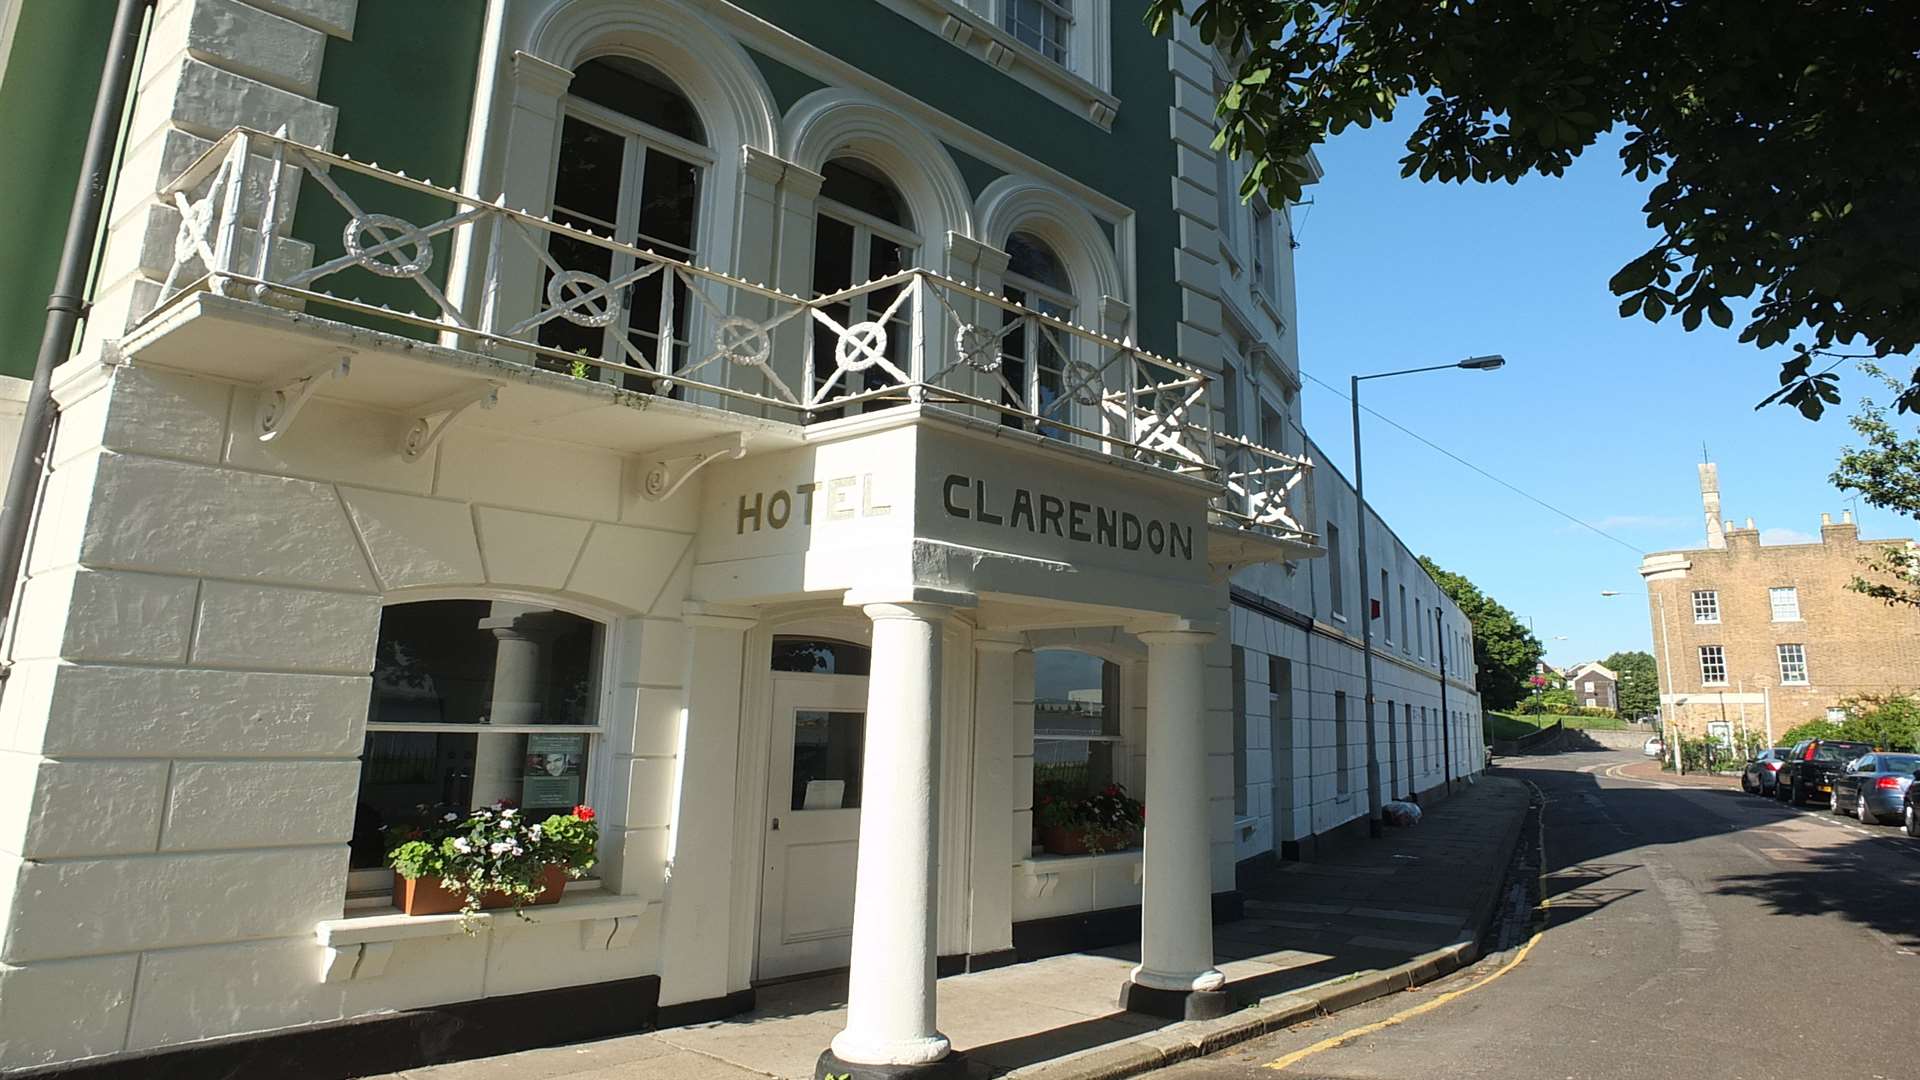 Clarendon Royal Hotel in Gravesend